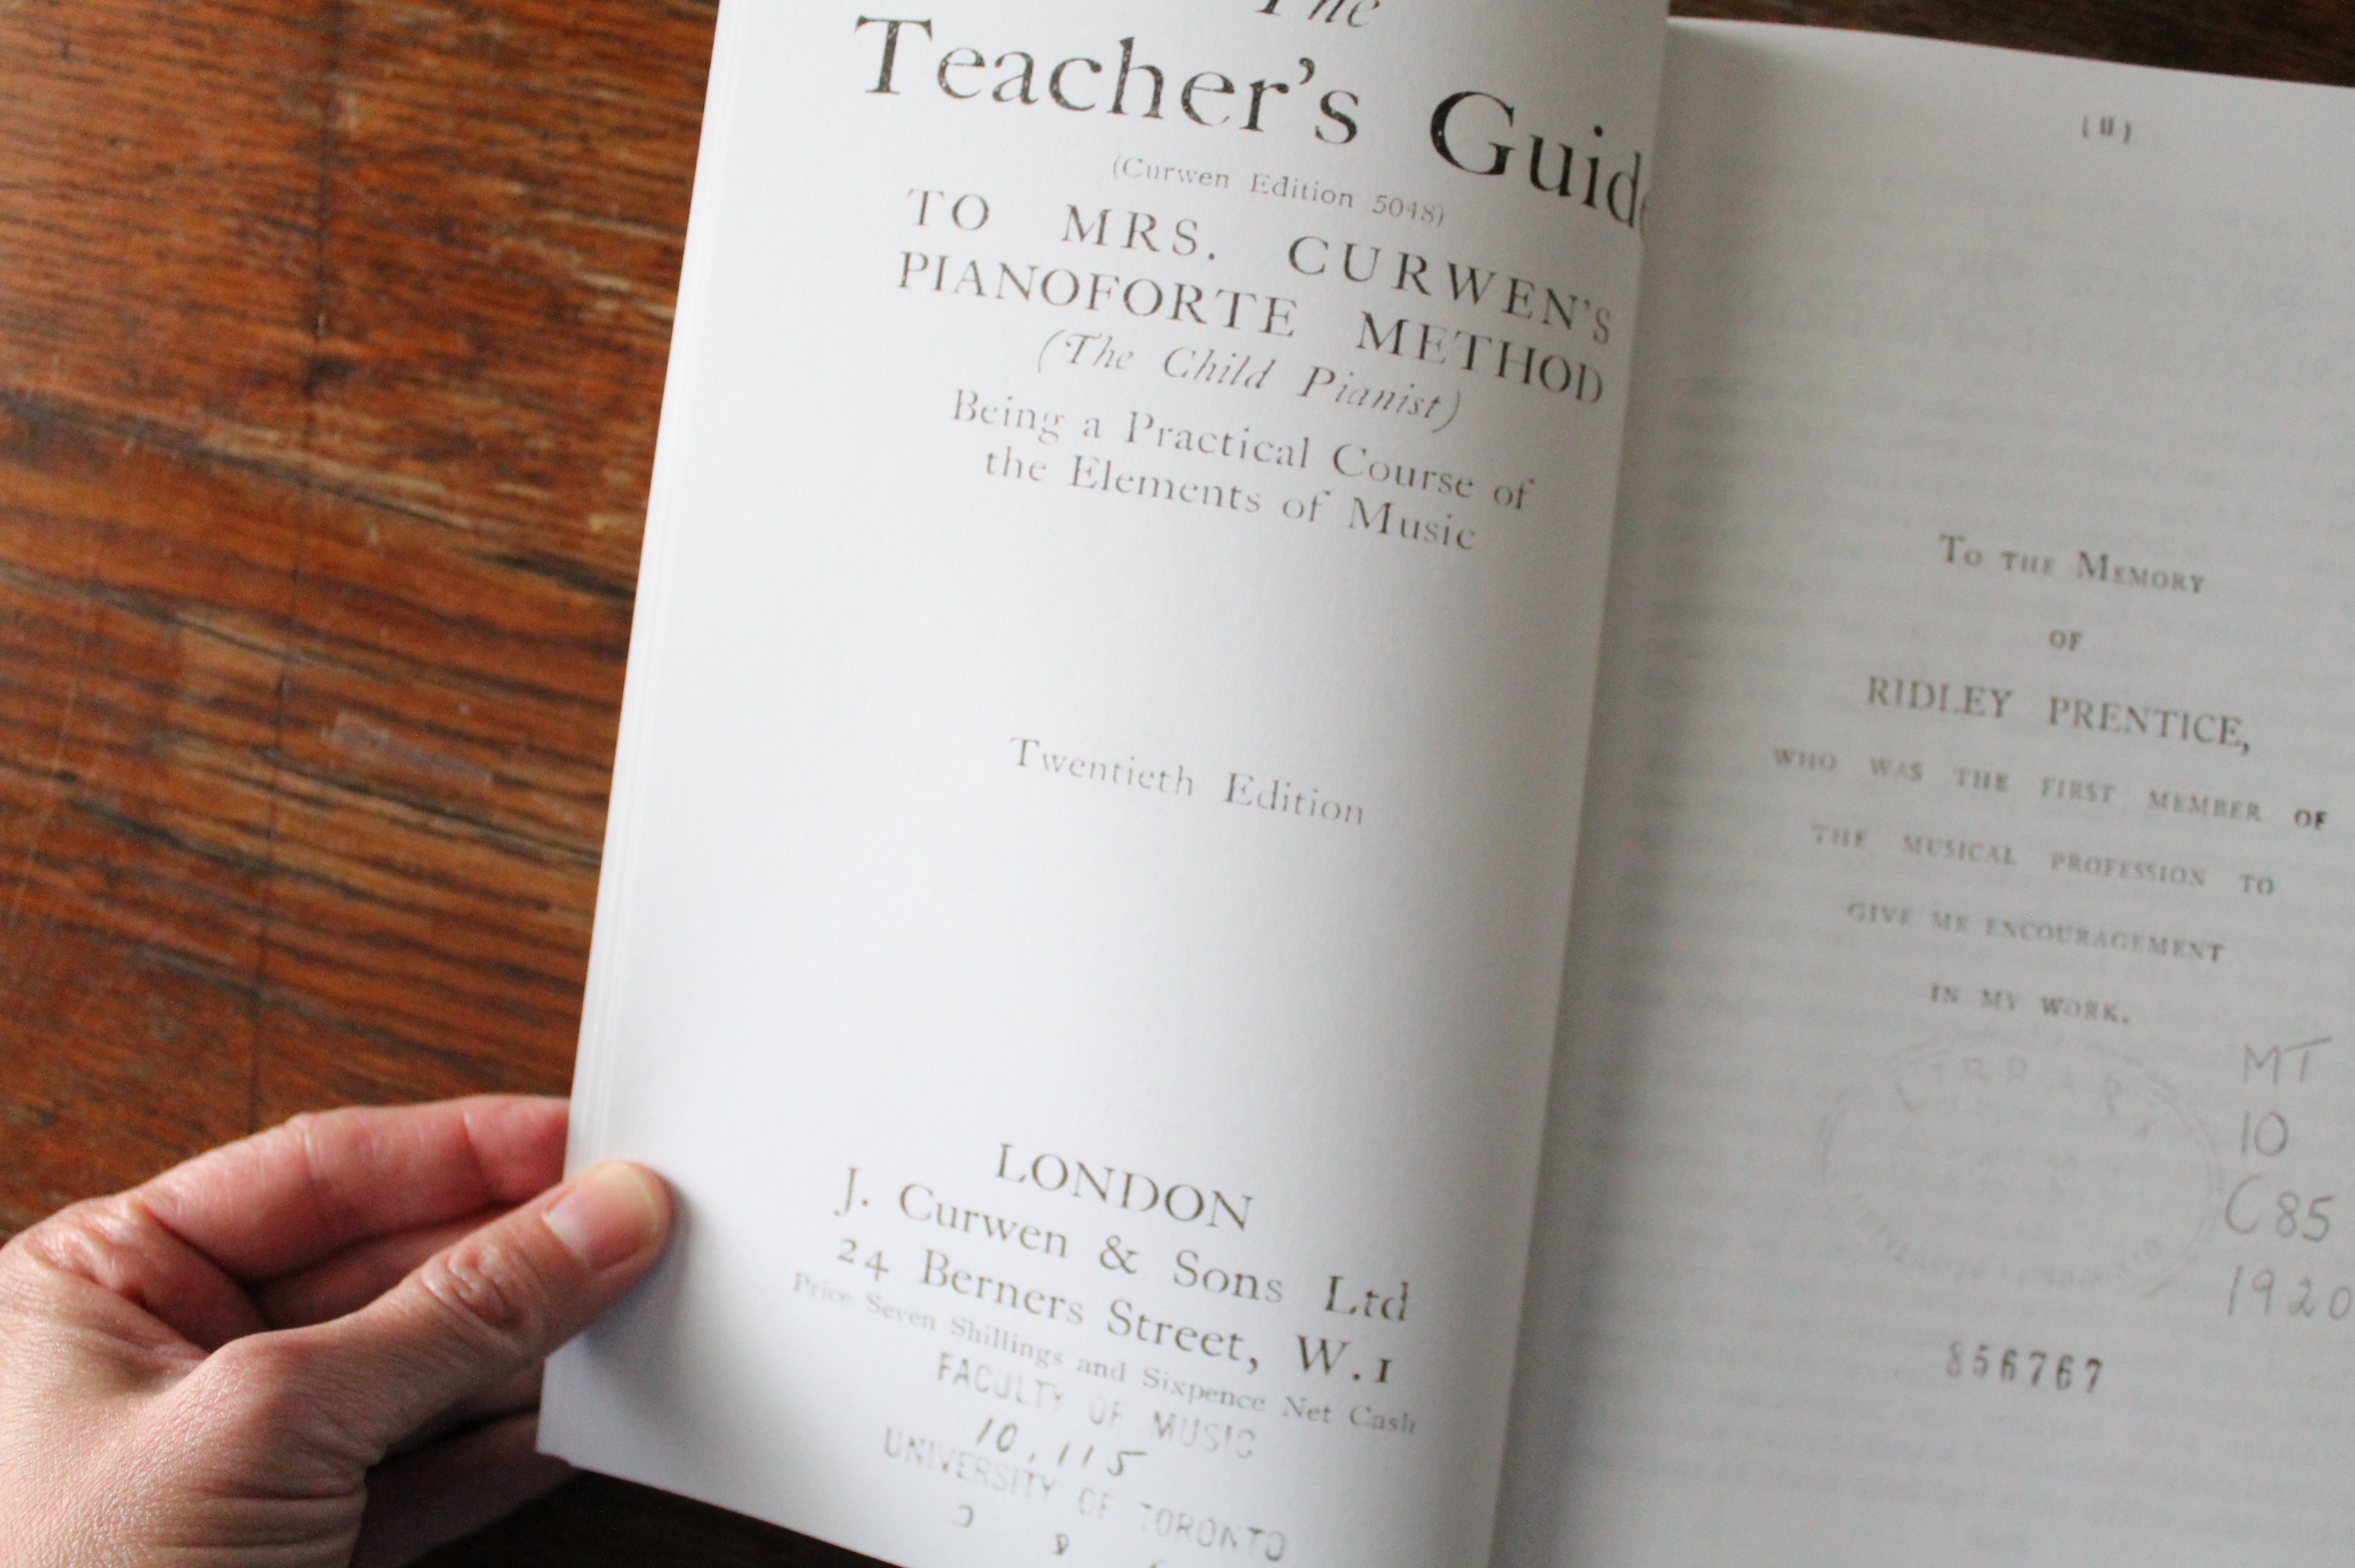 Mrs. Curwen's Teacher's Guide. Which version should I Purchase?